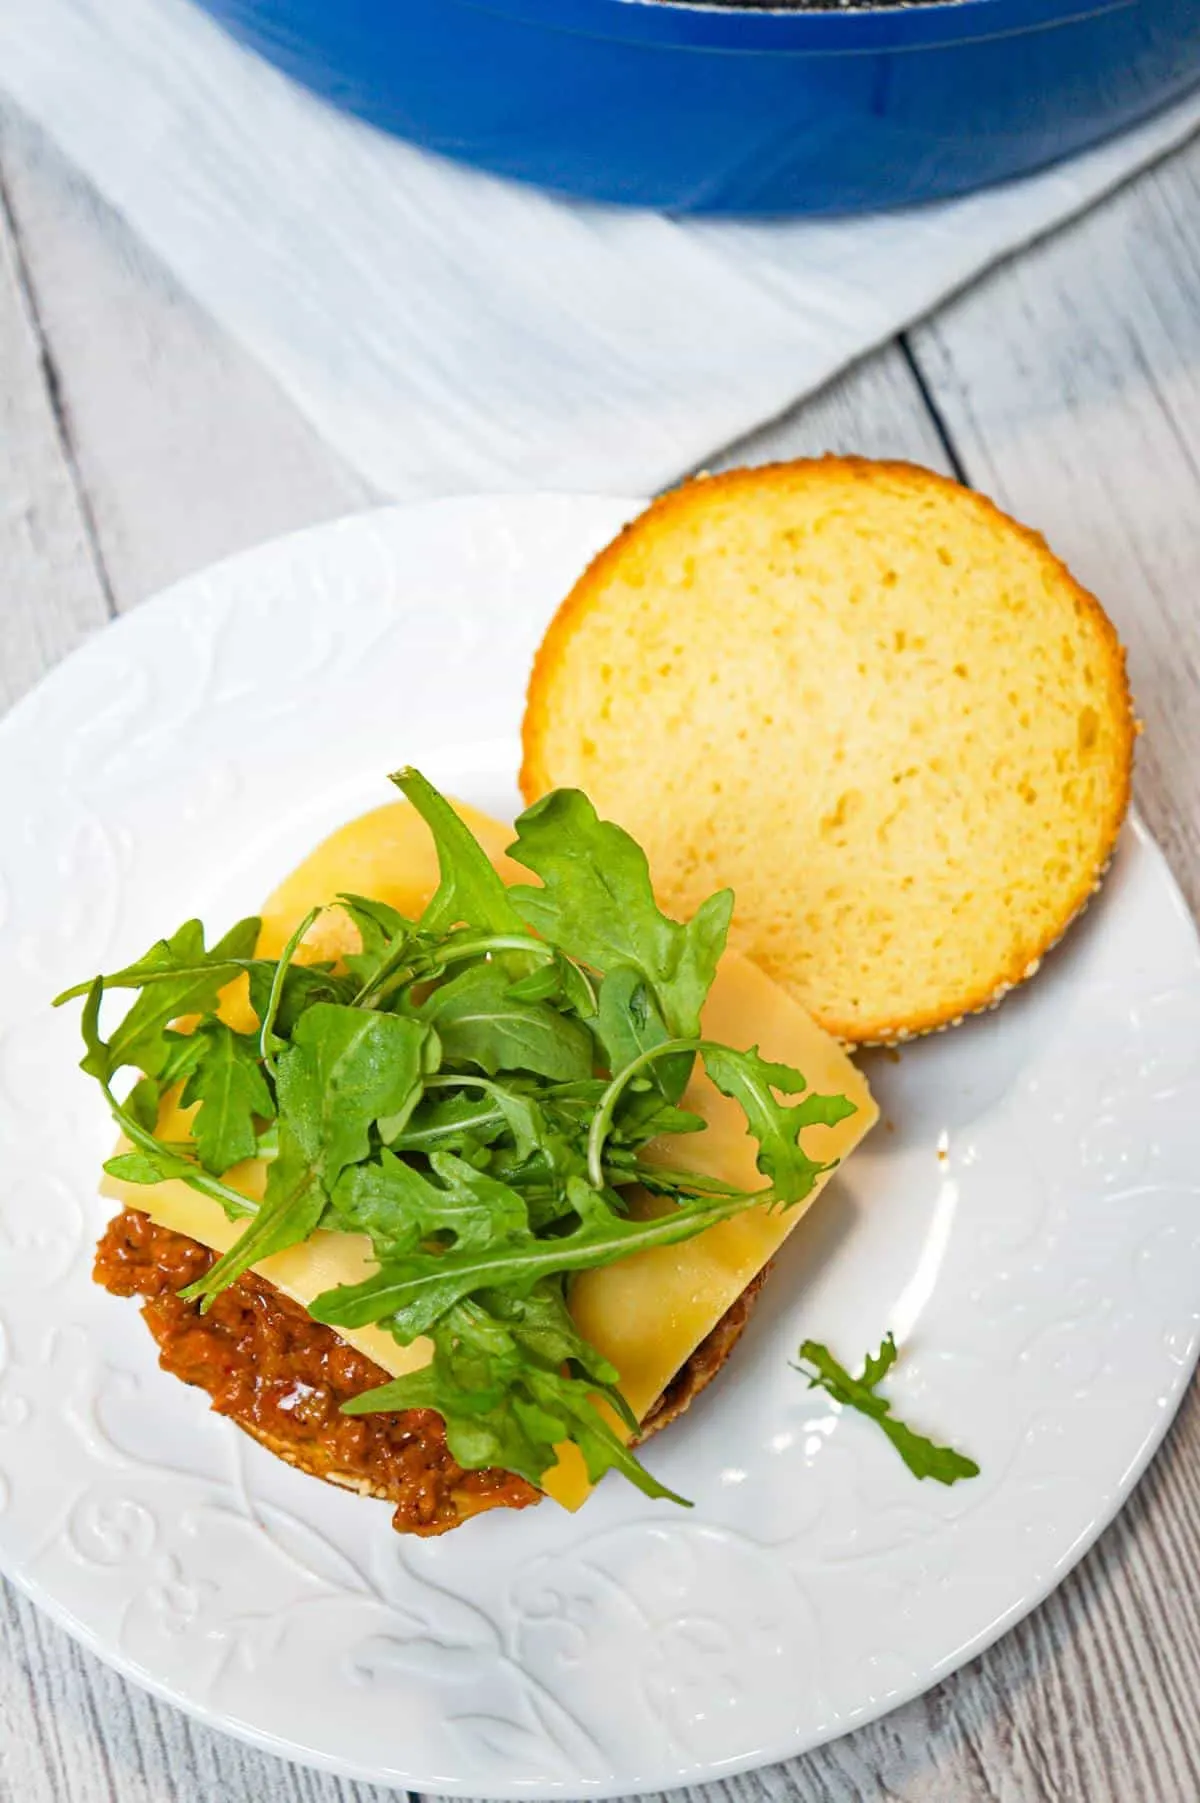 Butter Chicken Sloppy Joes are an easy ground chicken dinner recipe with a delicious tomato curry sauce served on Brioche buns with Havarti cheese and arugula.